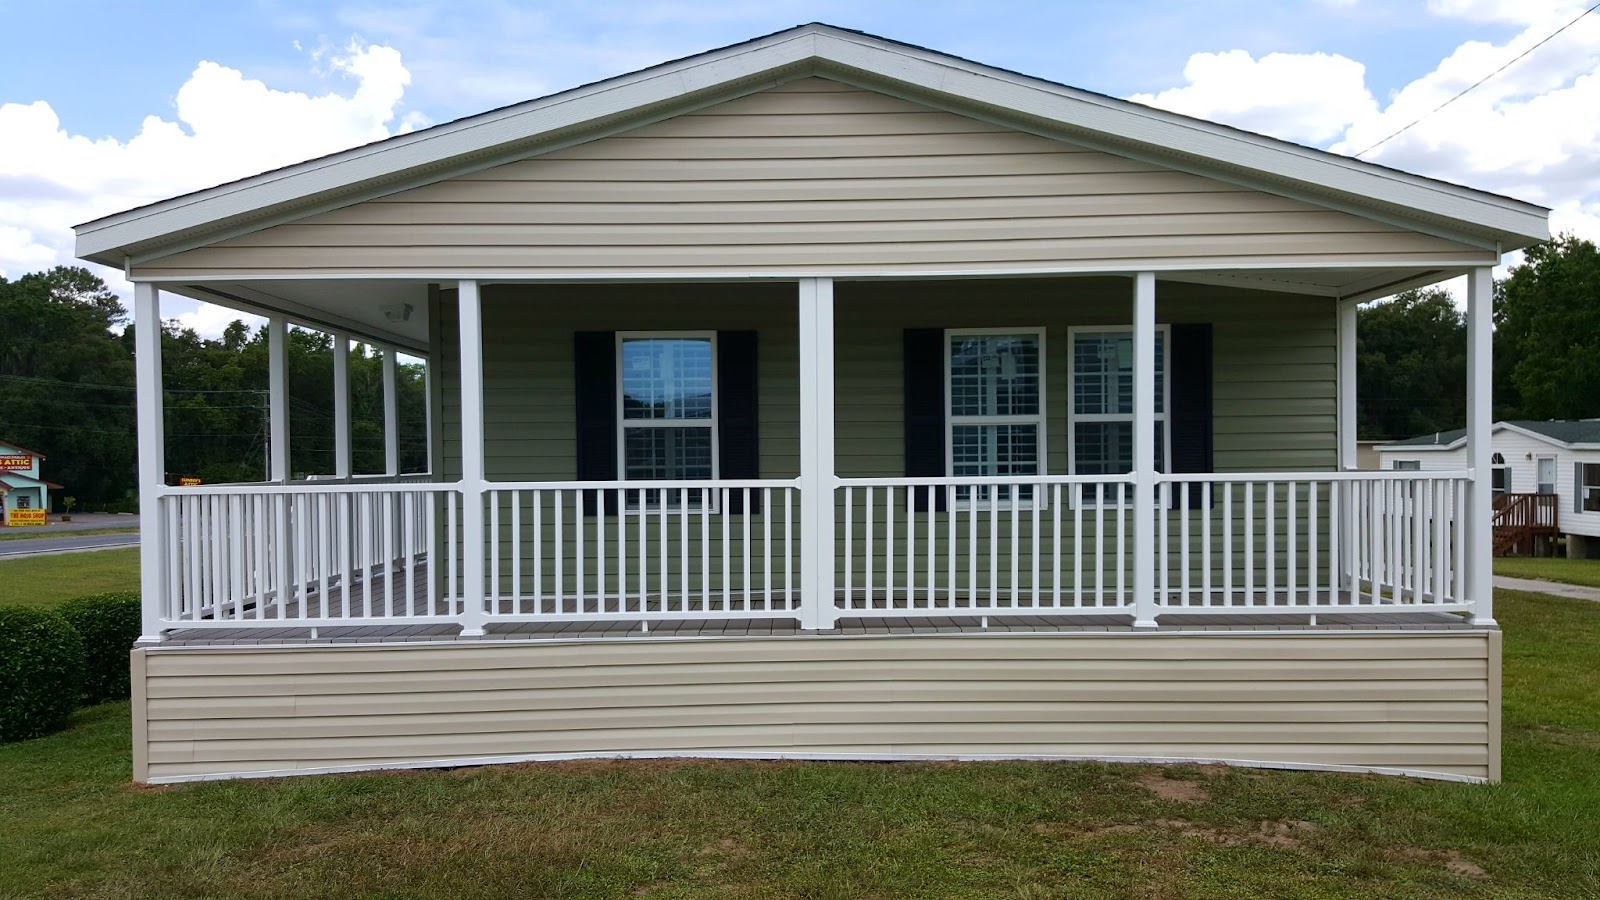 The wrap-around porch on the Ryan, one of Prestige's many manufactured home models